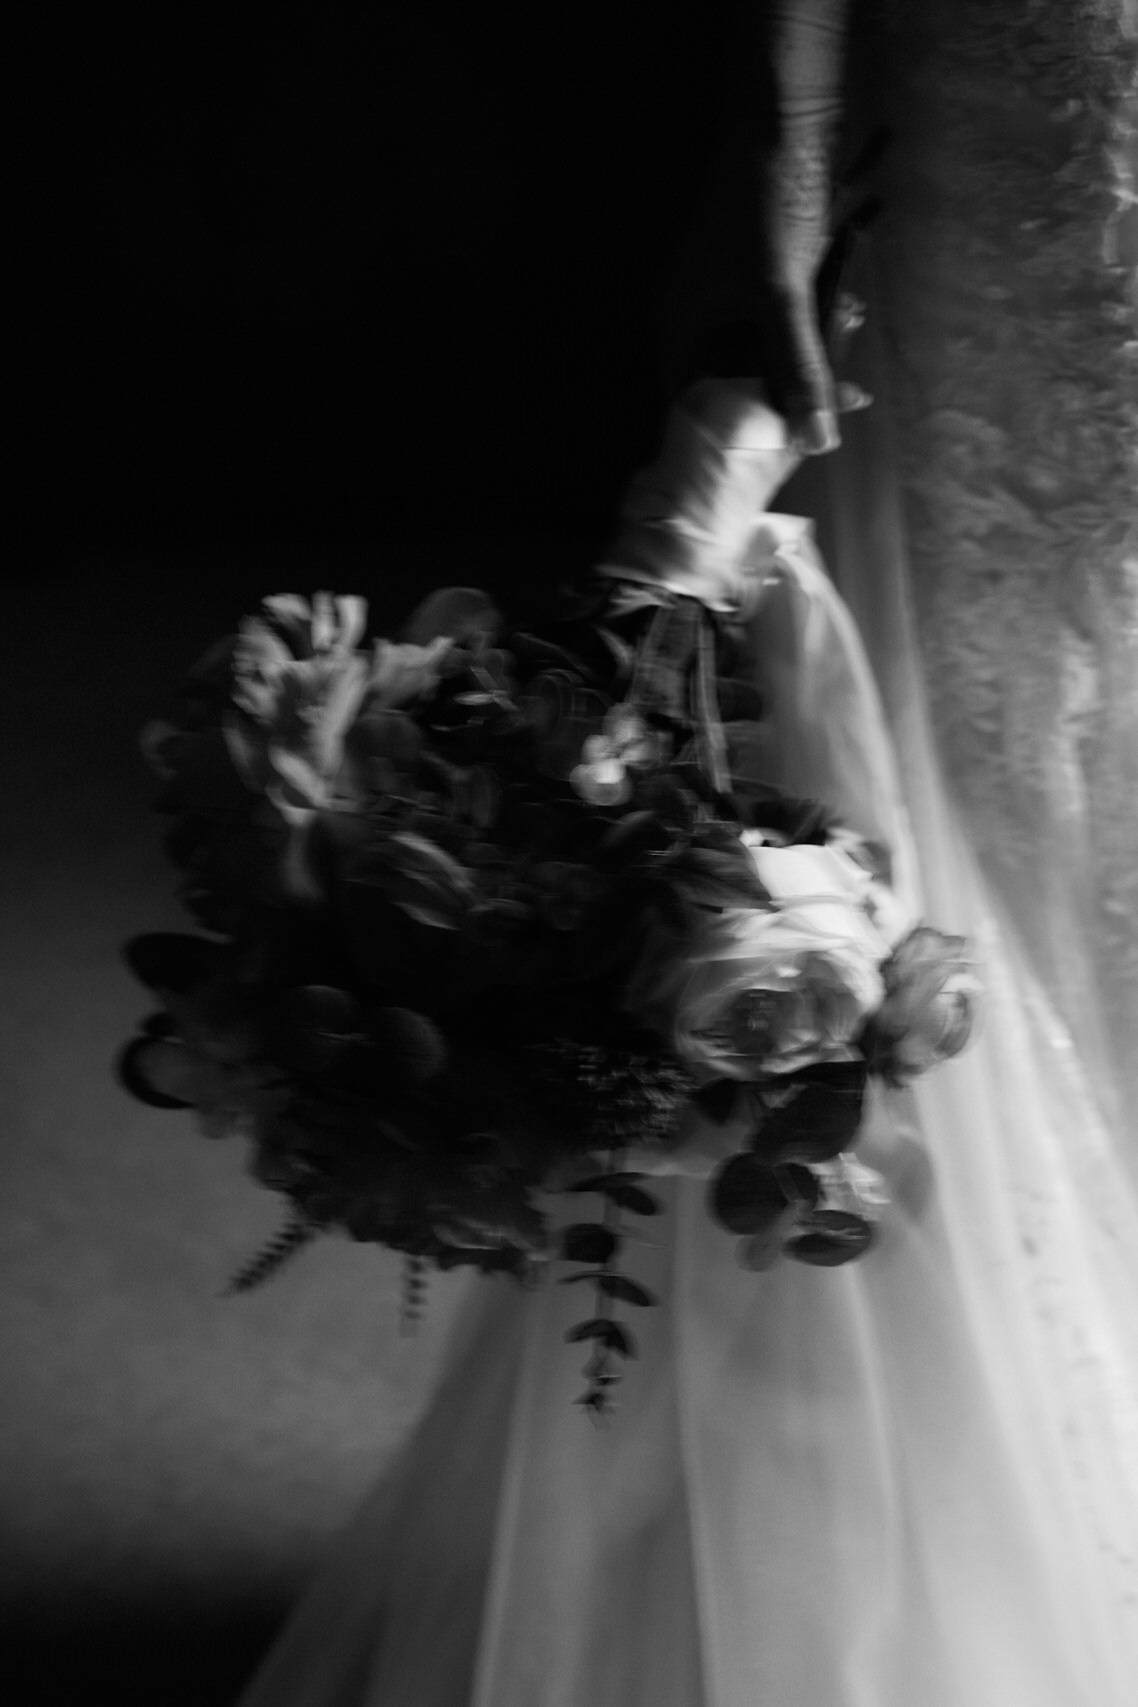 A snapshot in black and white of a bride carrying some flowers.